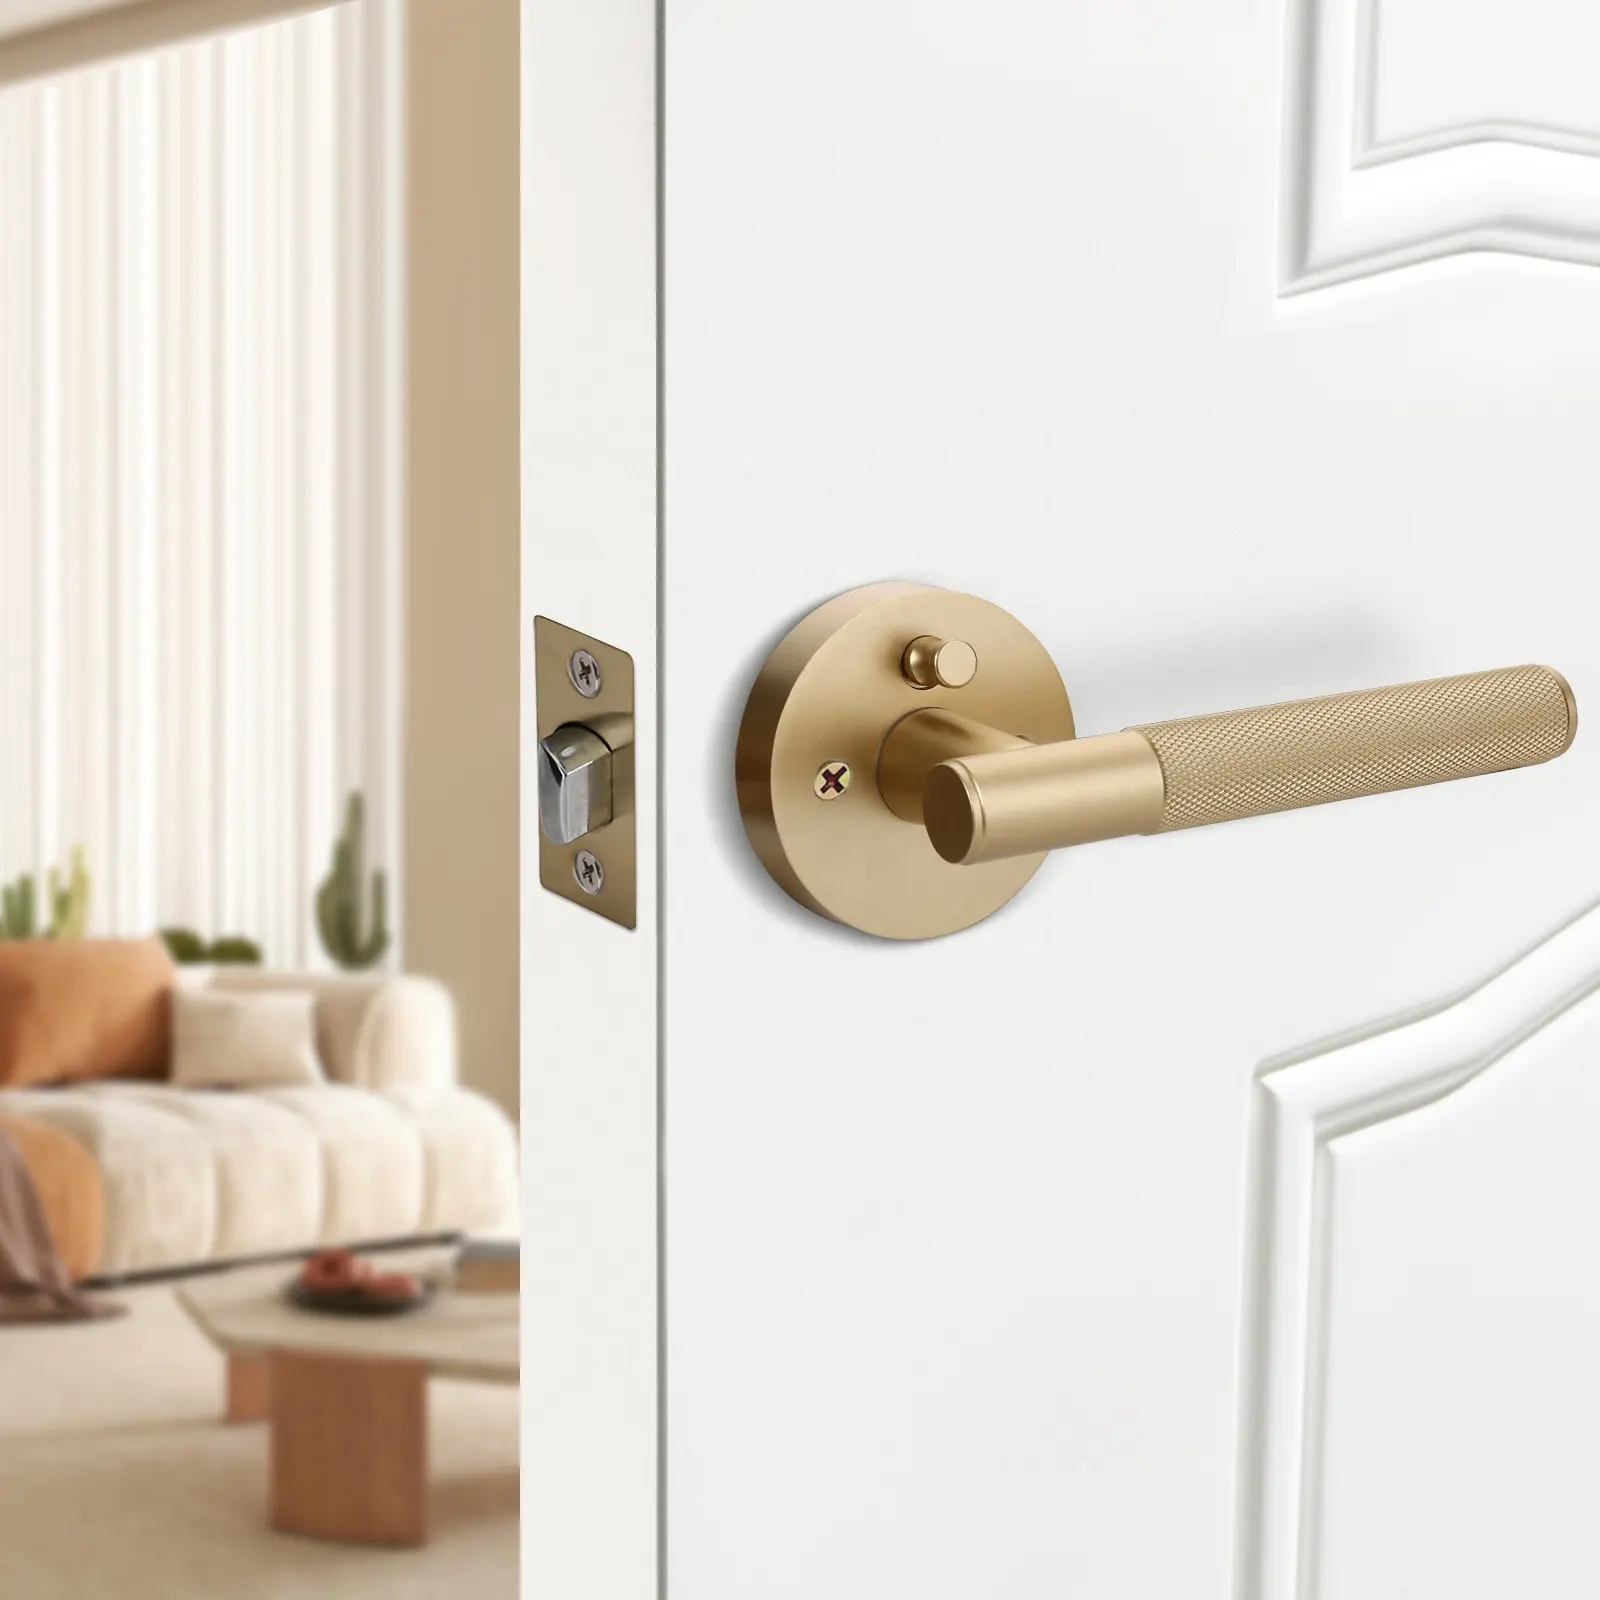 American Painted Matt Gold Interior Door Handle with Privacy Lock for Luxury Home Interiors